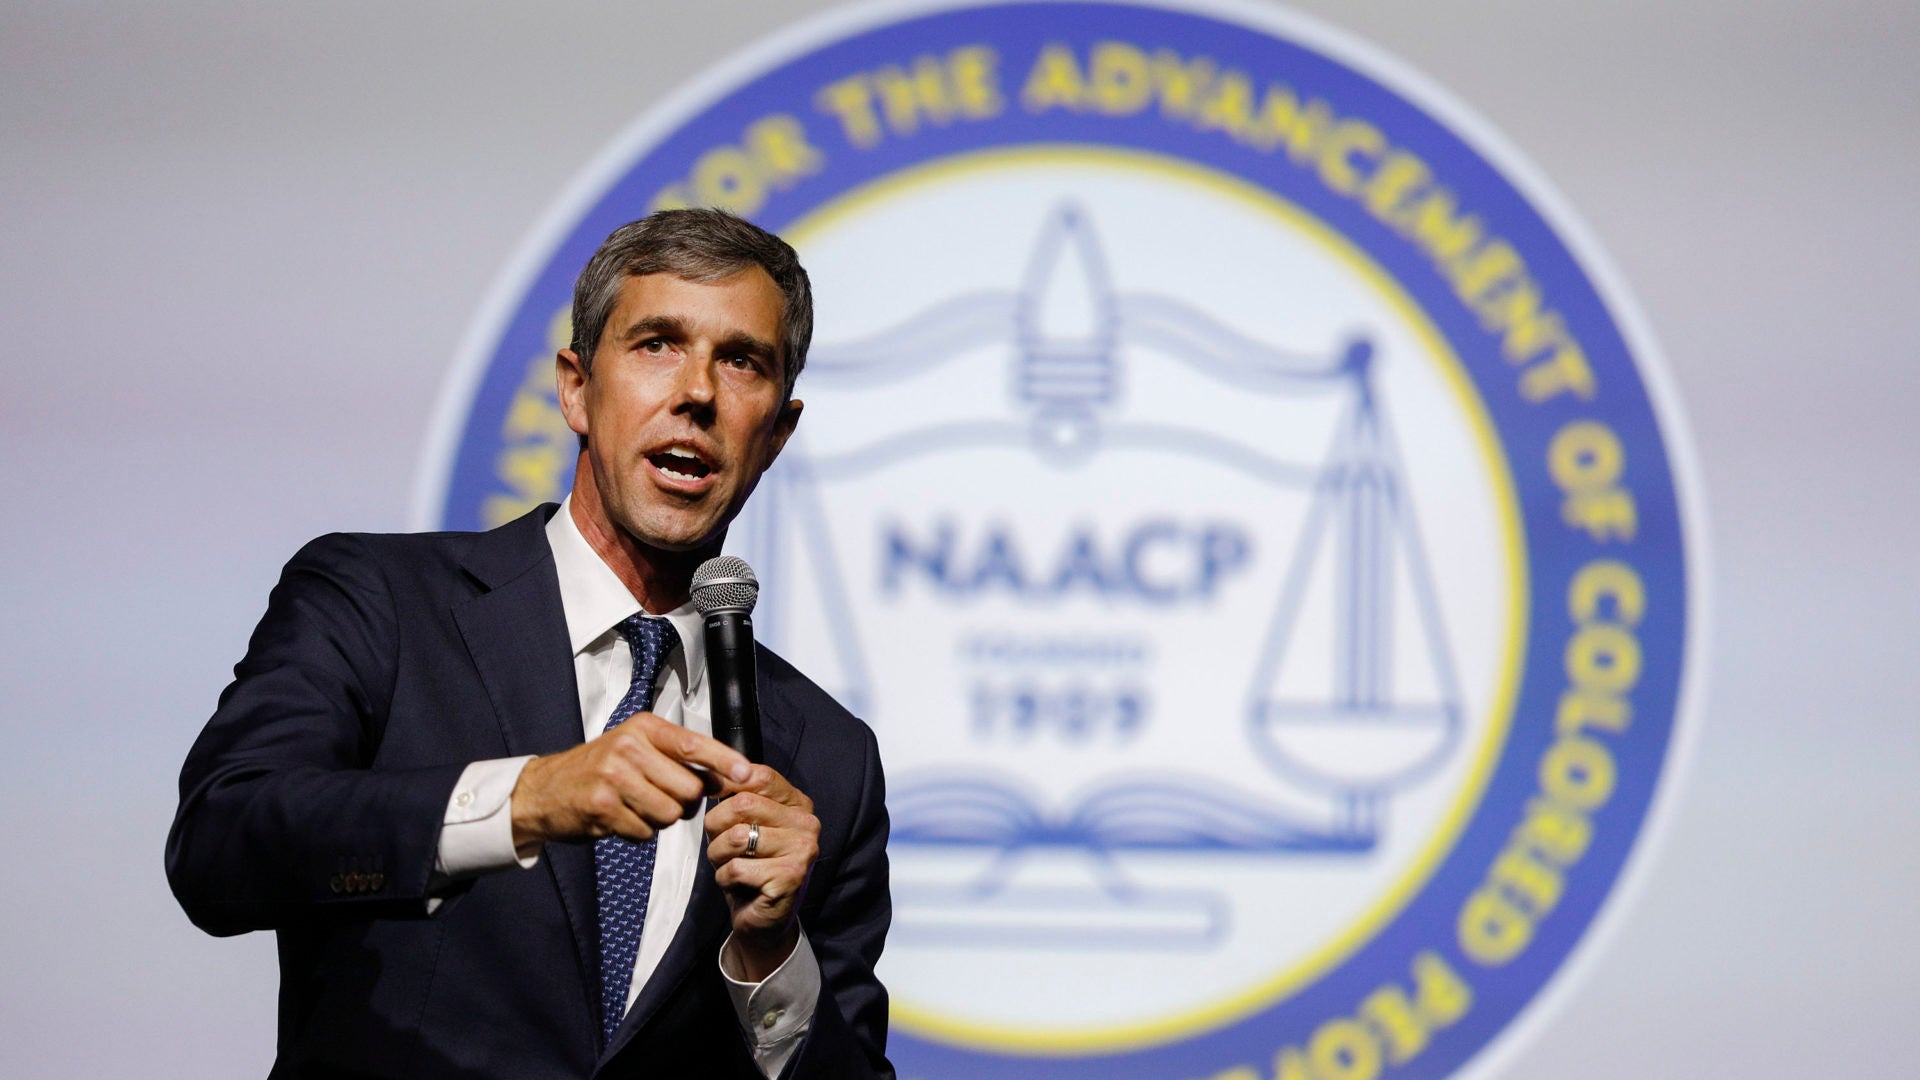 Beto O’Rourke Determined To End Trump Administration’s ‘Worst Practices’